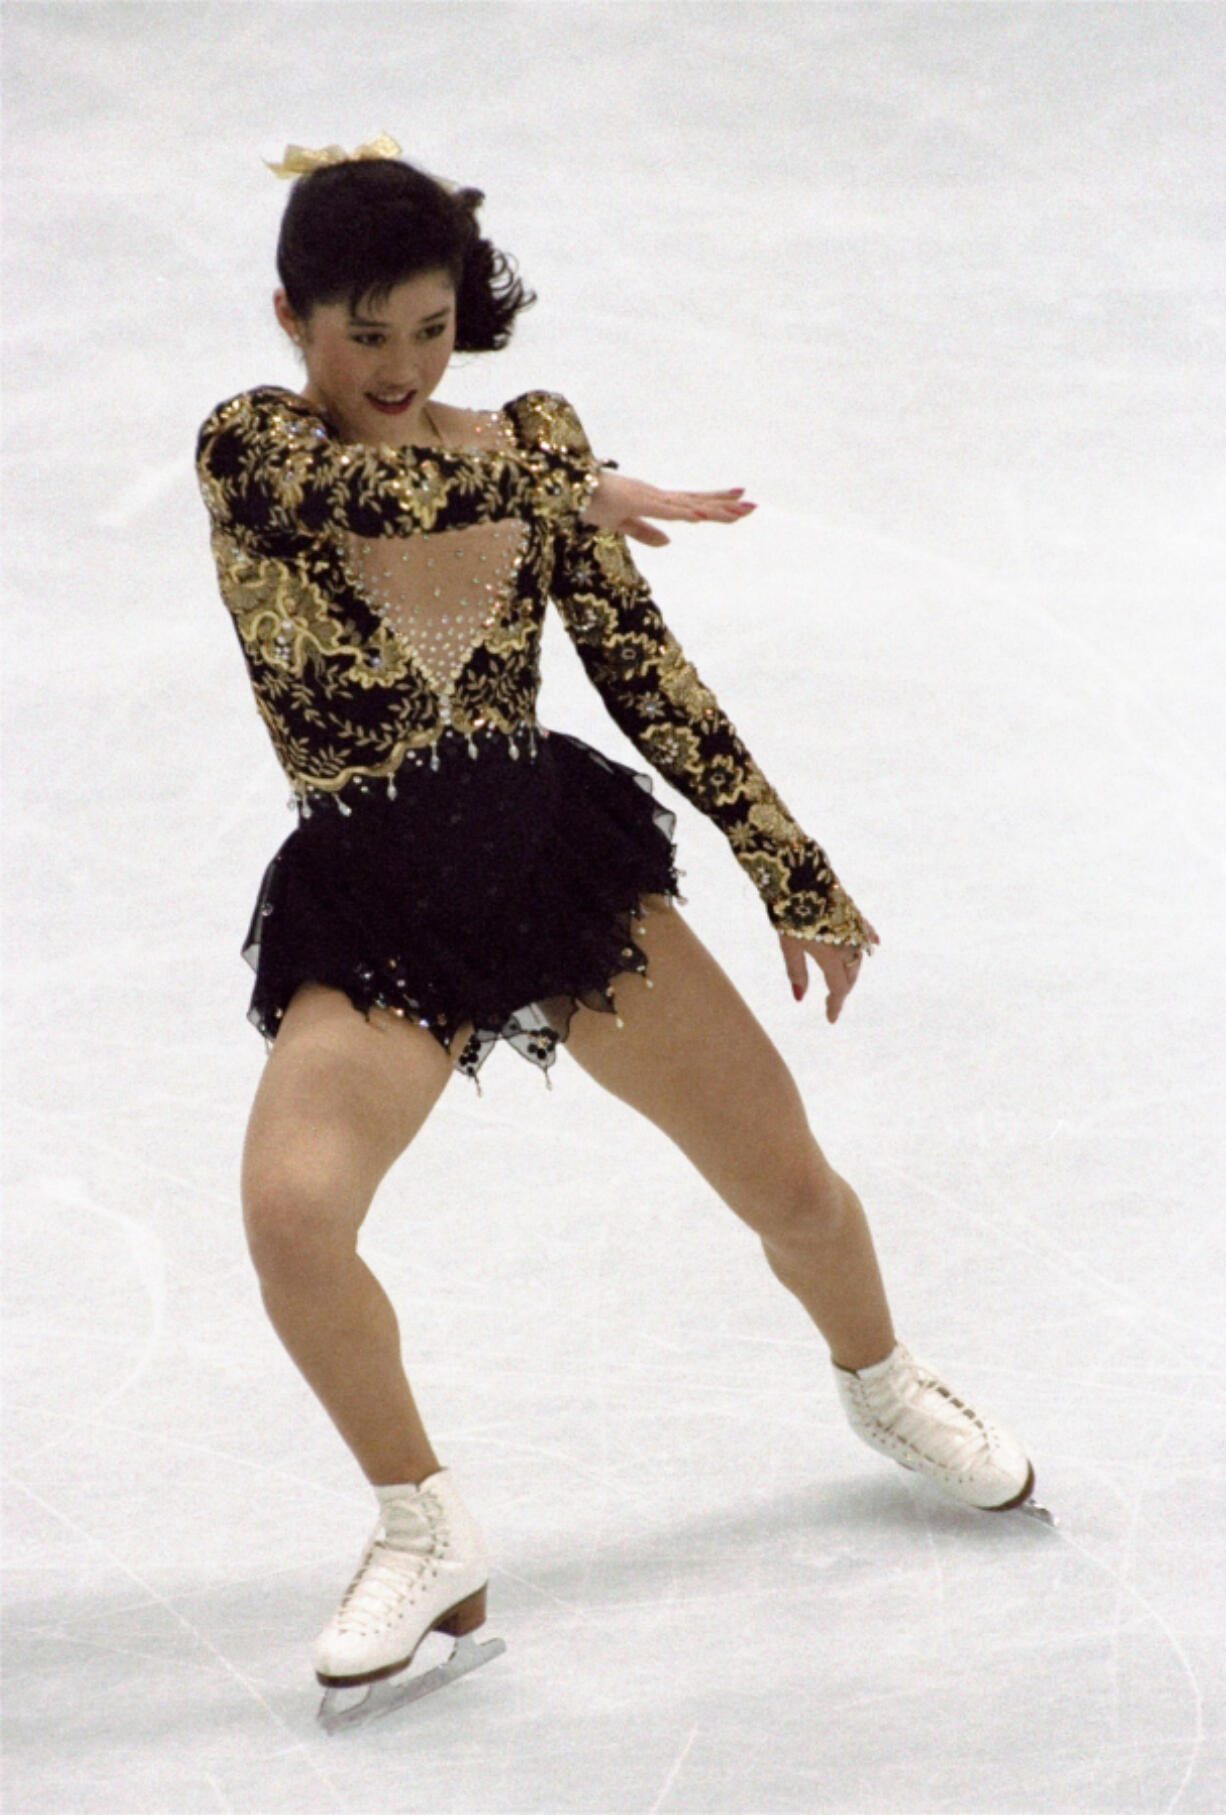 Kristi Yamaguchi of the U.S. skates in the free skating portion of the women&rsquo;s figure skating competition at the XVI Winter Olympic Games in Albertville, France on Feb. 21, 1992.